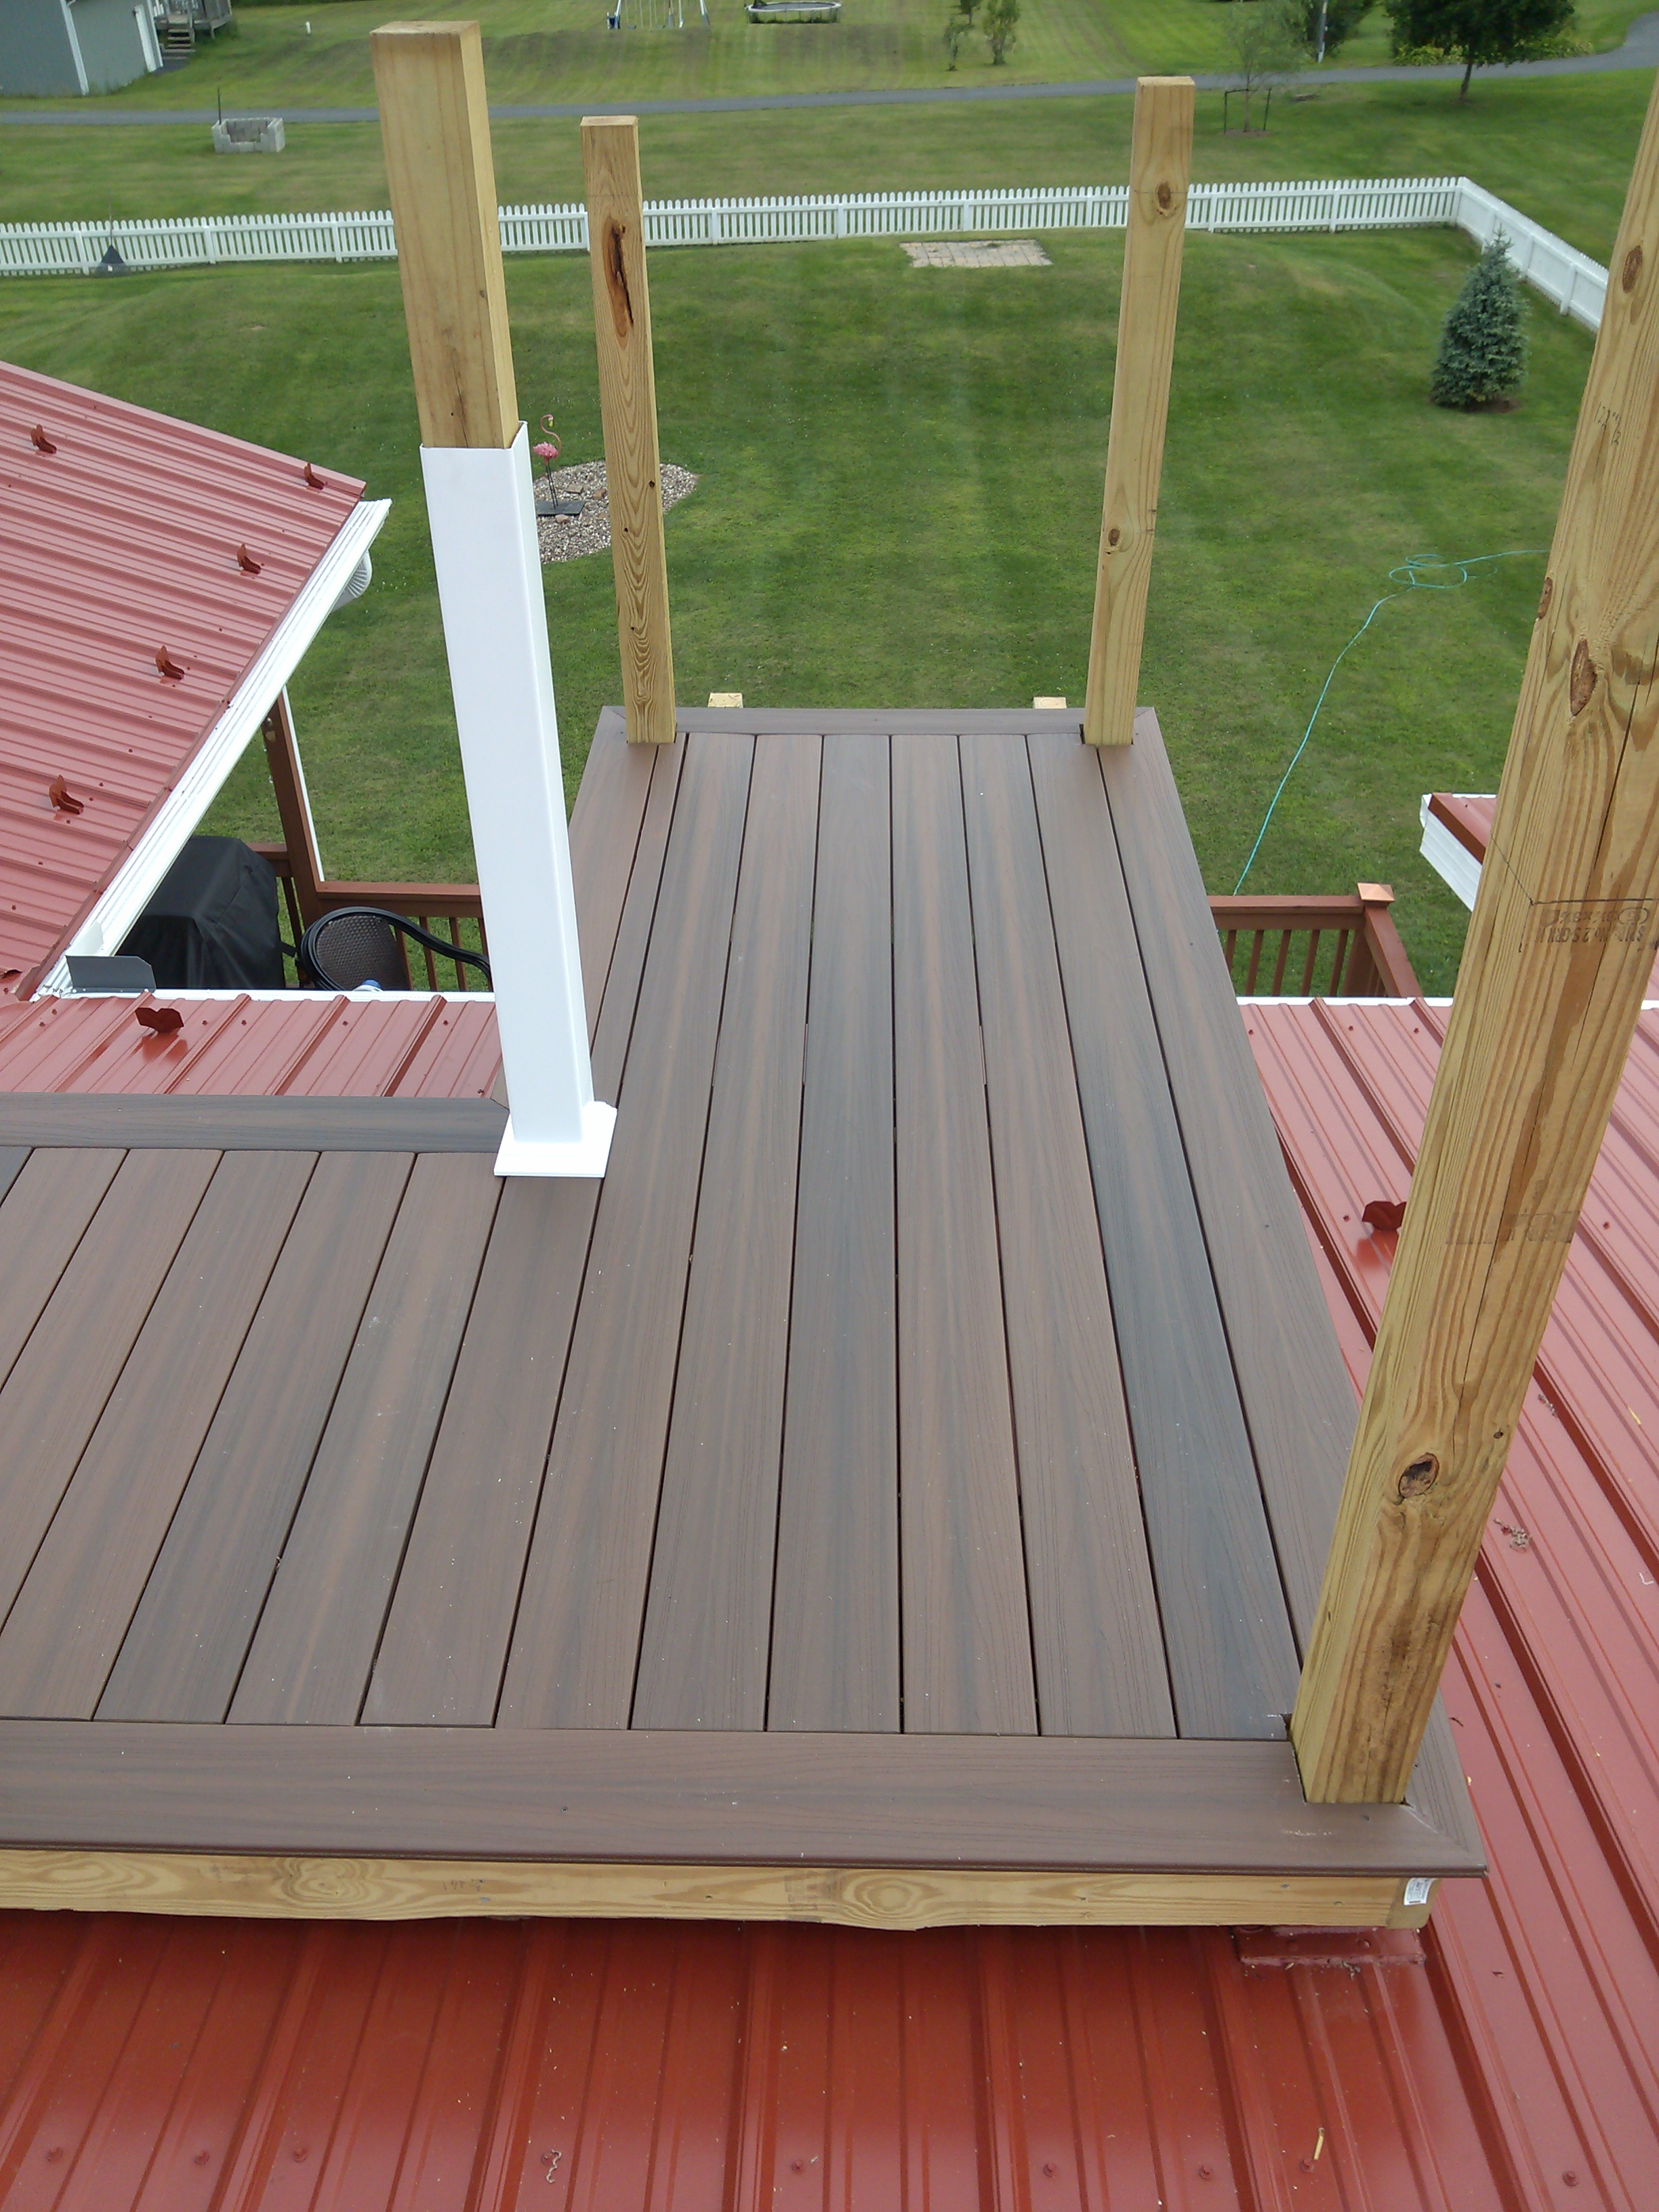 Decking Plastic Wood Composites Top Notch General Construction intended for sizing 2448 X 3264